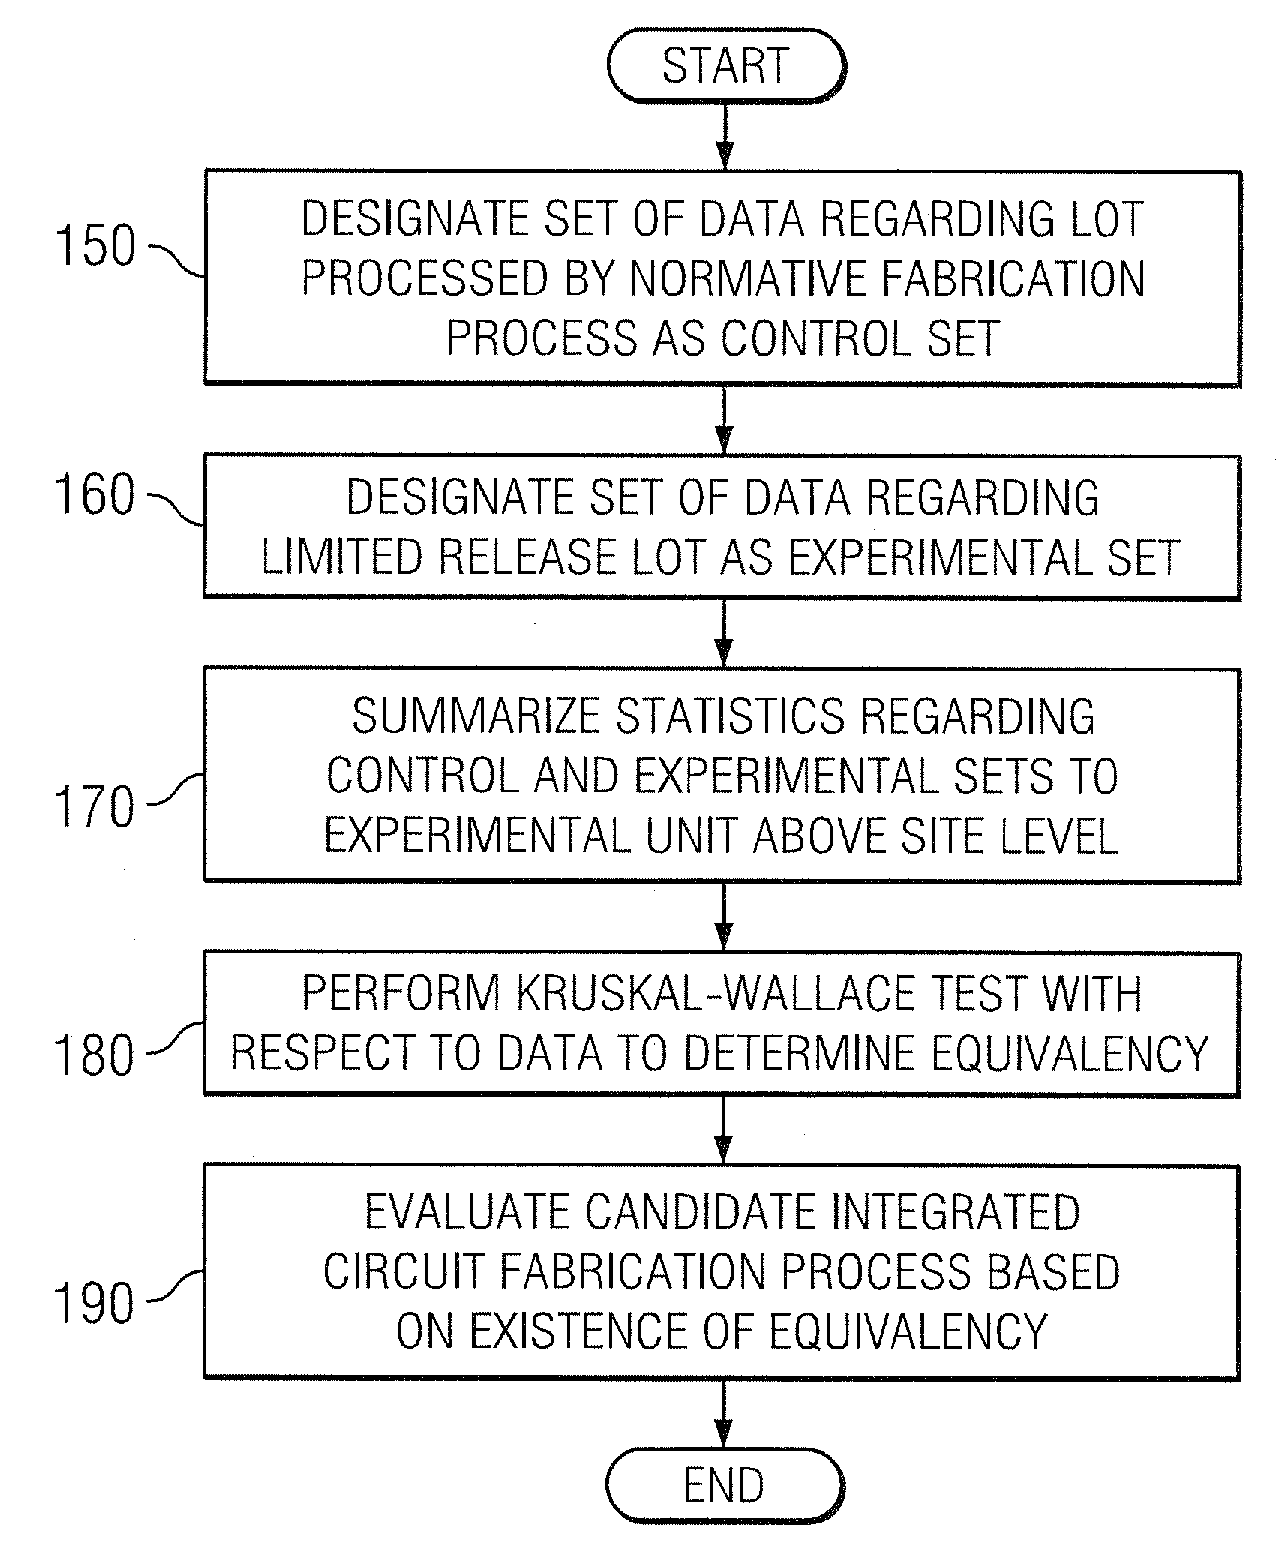 Methods of analyzing integrated circuit equivalency and manufacturing an integrated circuit